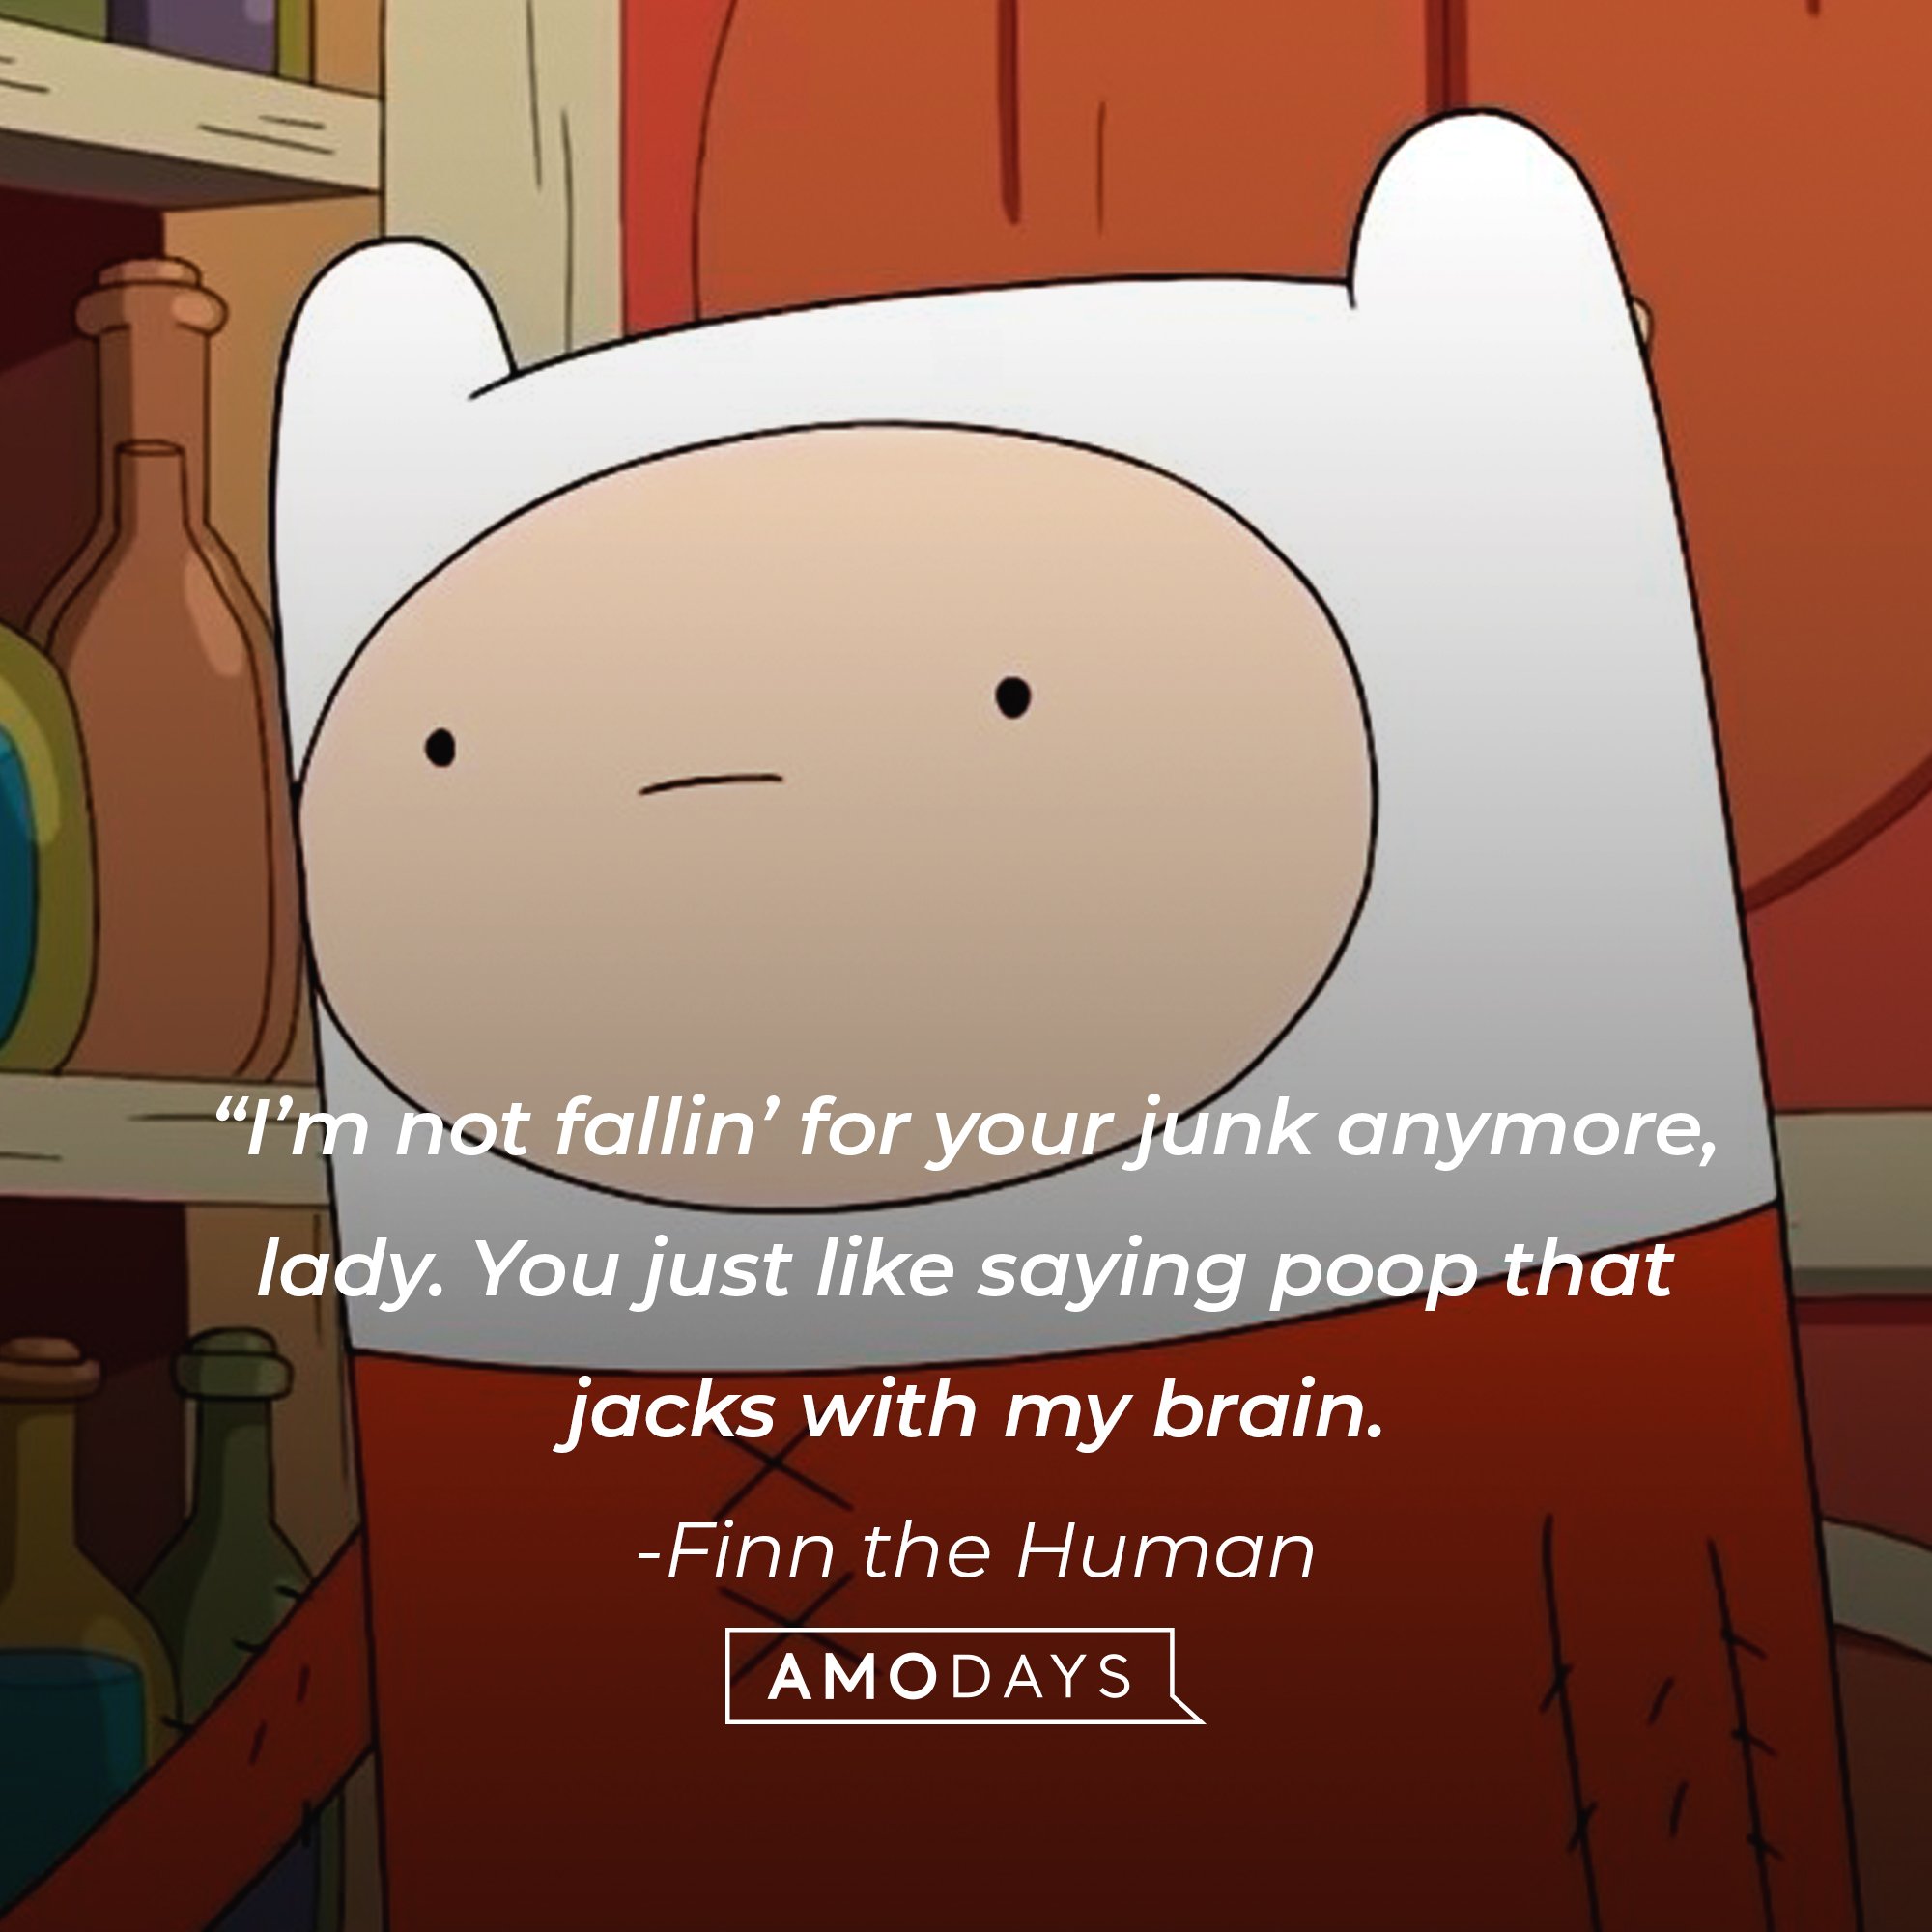    Finn the Human’s quote: "I’m not fallin’ for your junk anymore, lady. You just like saying poop that jacks with my brain.”  | Image: AmoDays